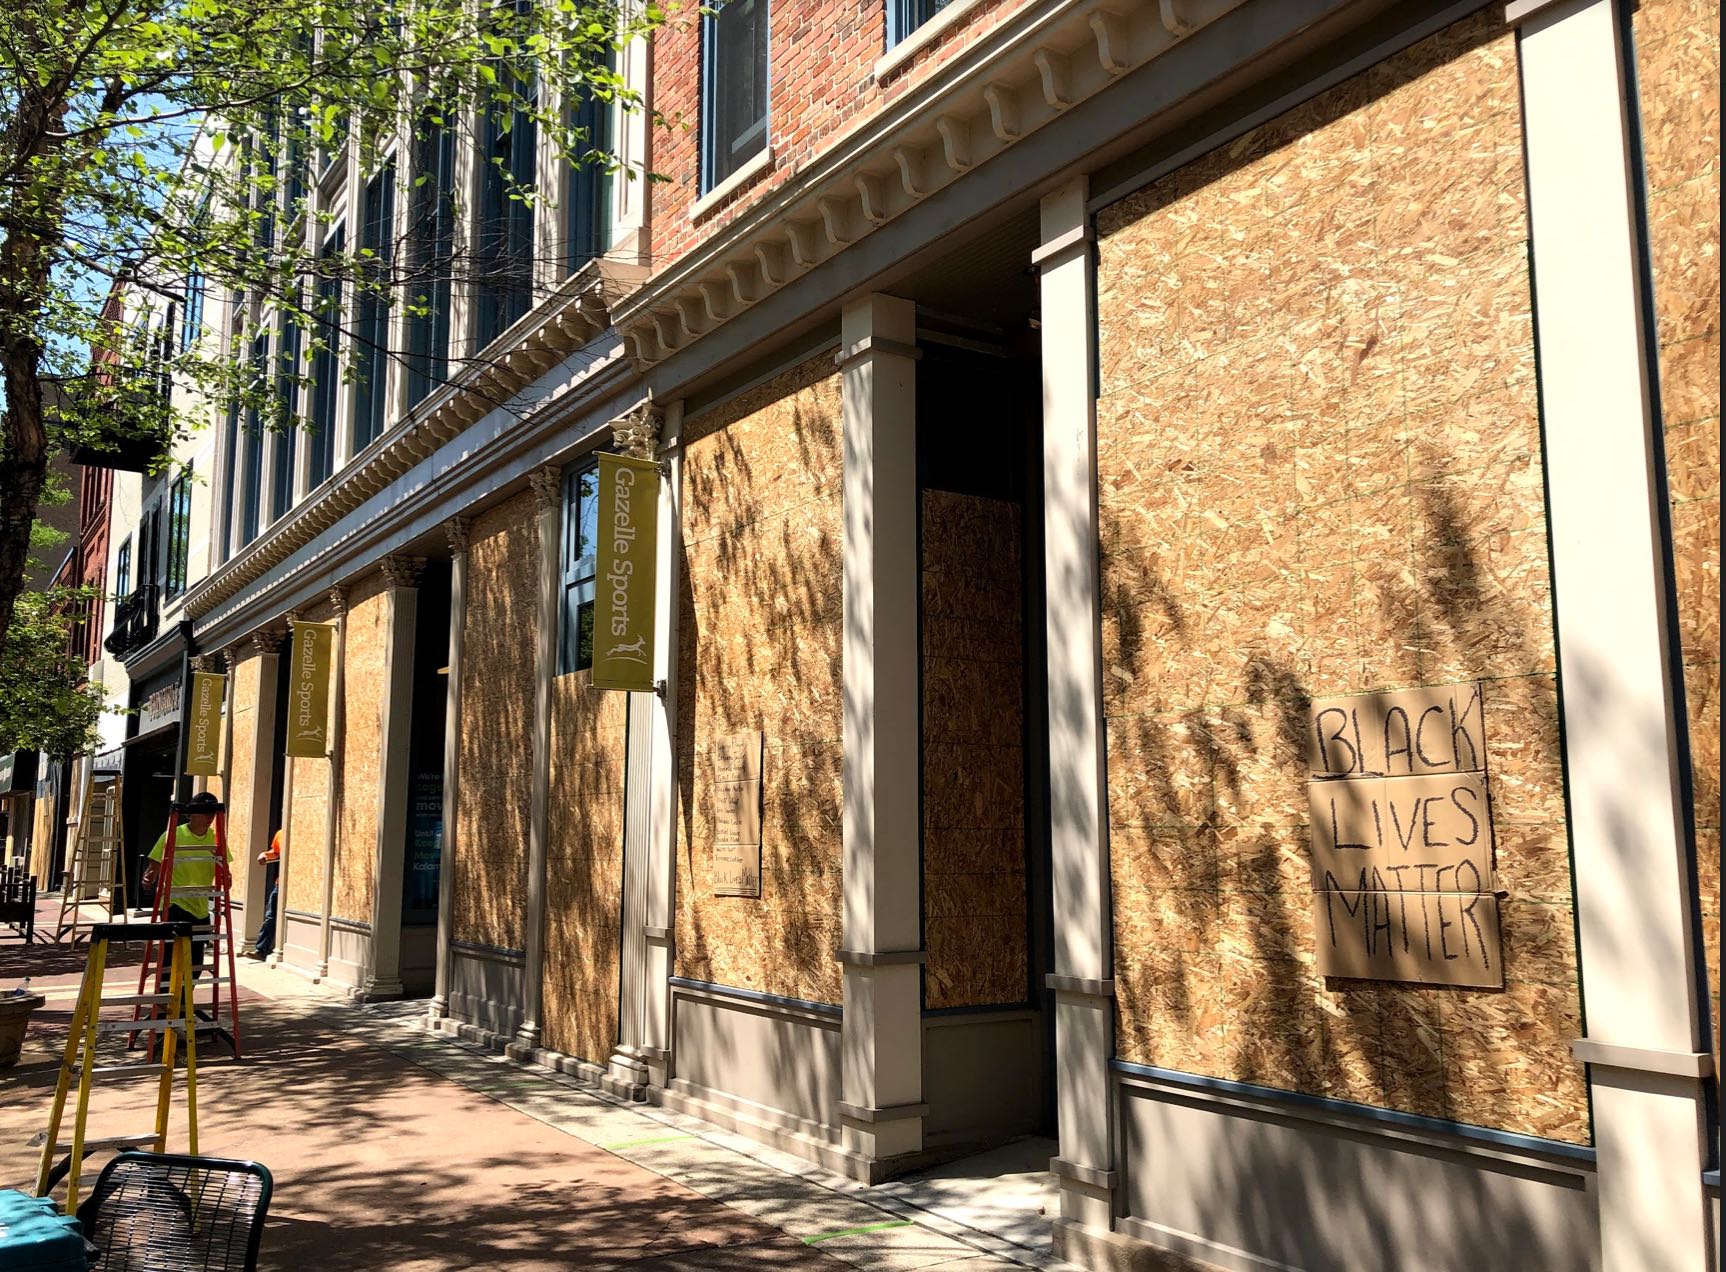 In downtown Kalamazoo, store owners erect plywood and brace for damage